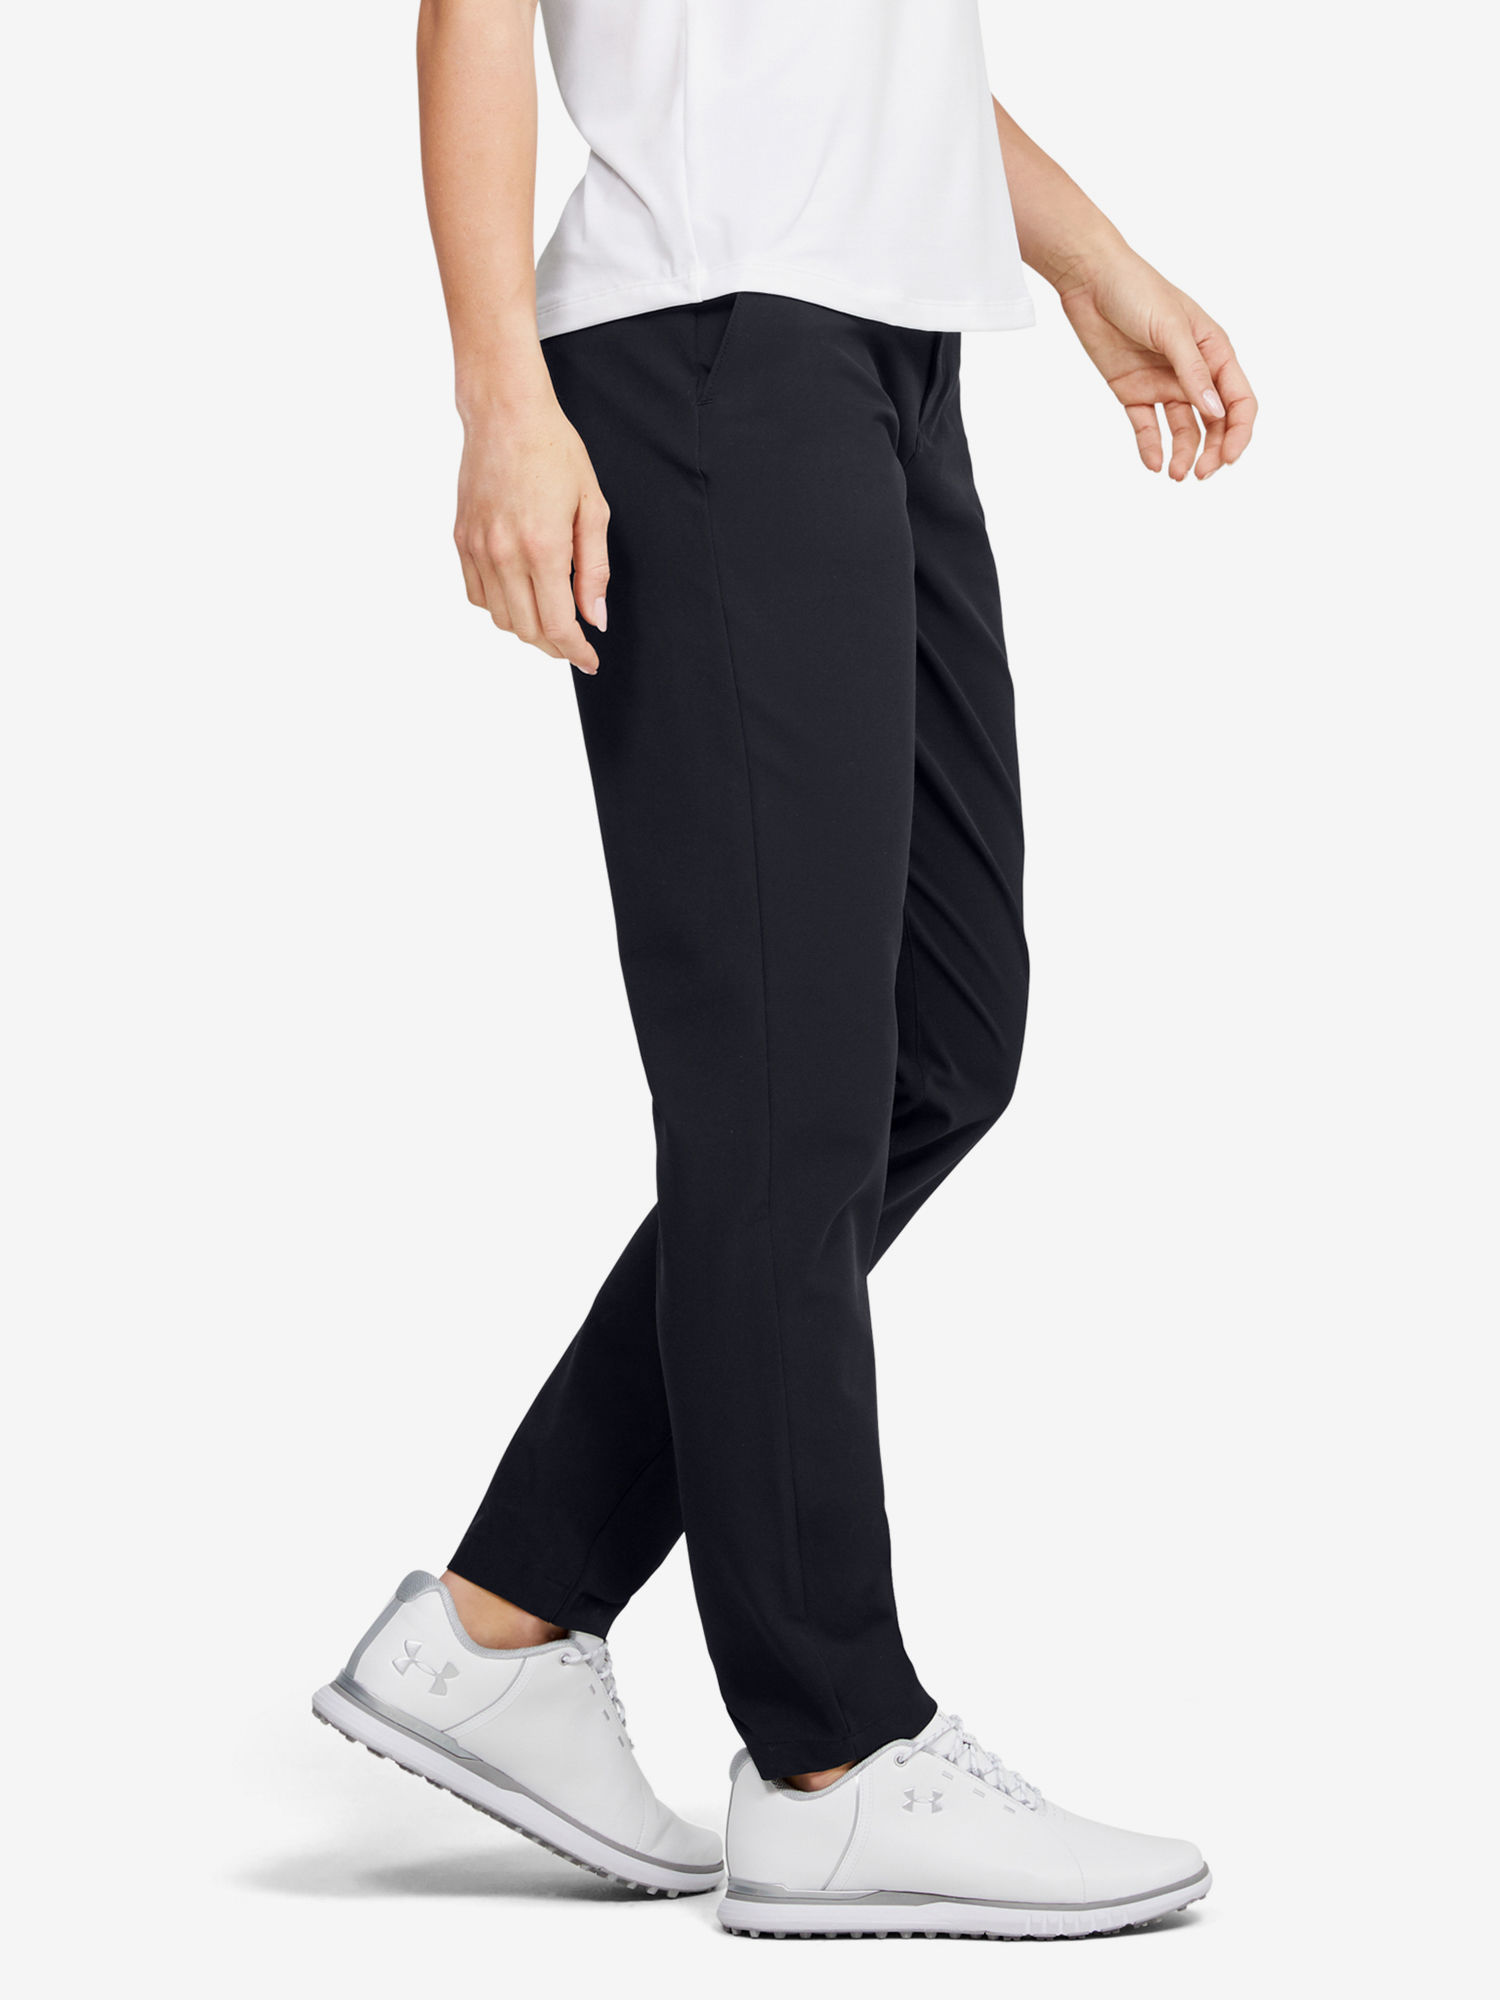 Kalhoty Under Armour Links Pant-BLK (3)